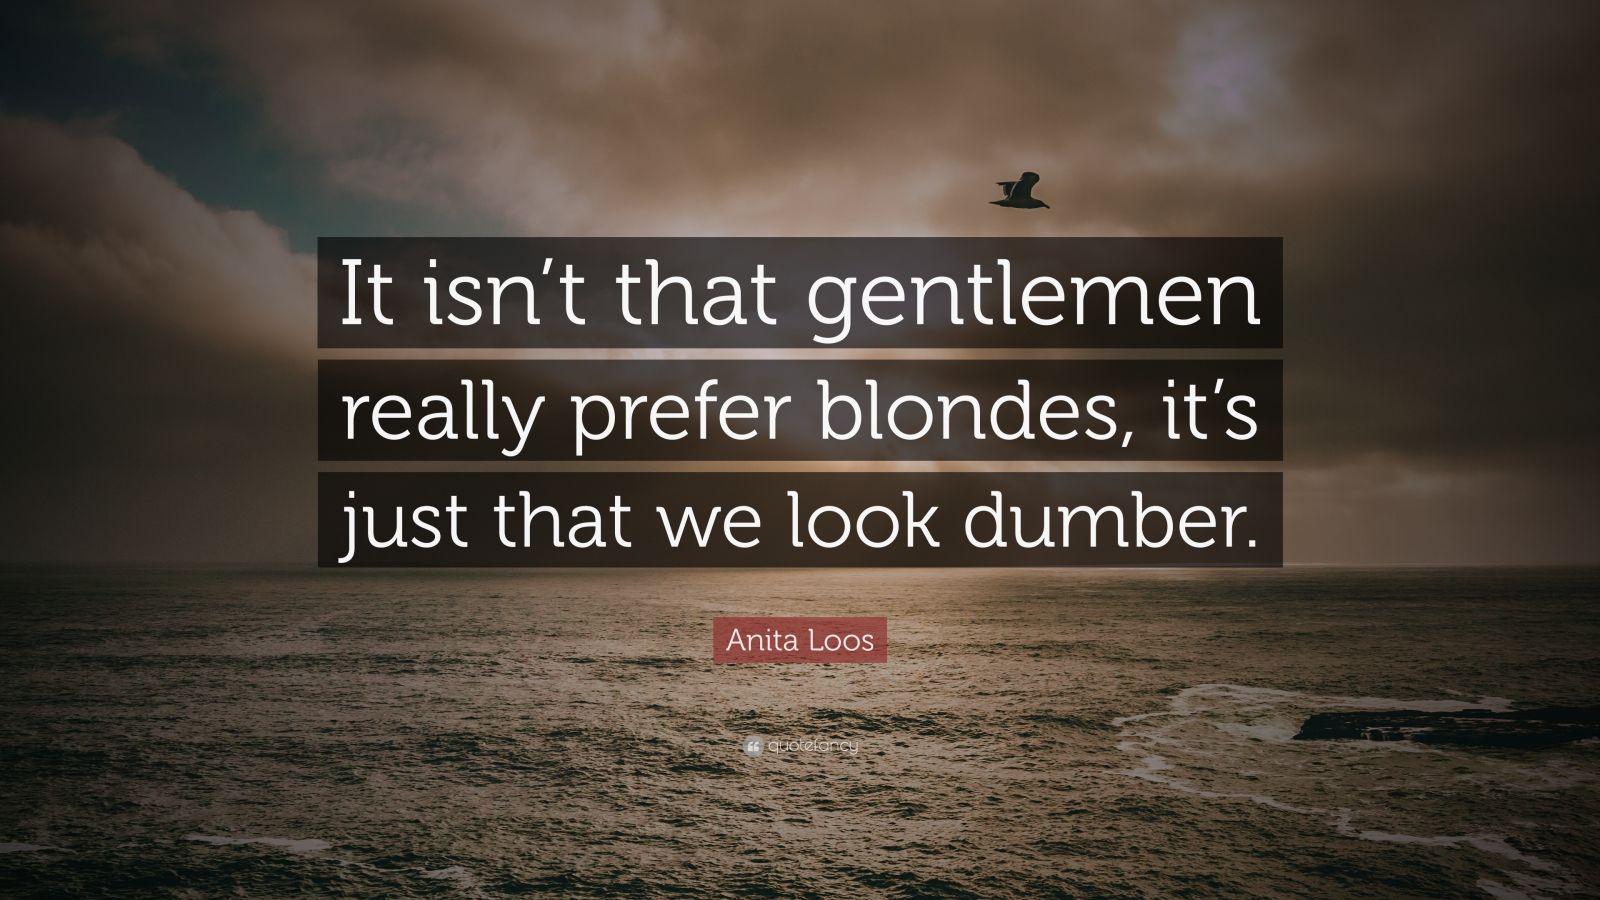 Anita Loos Quote: "It isn't that gentlemen really prefer blondes, it's just that we look dumber ...